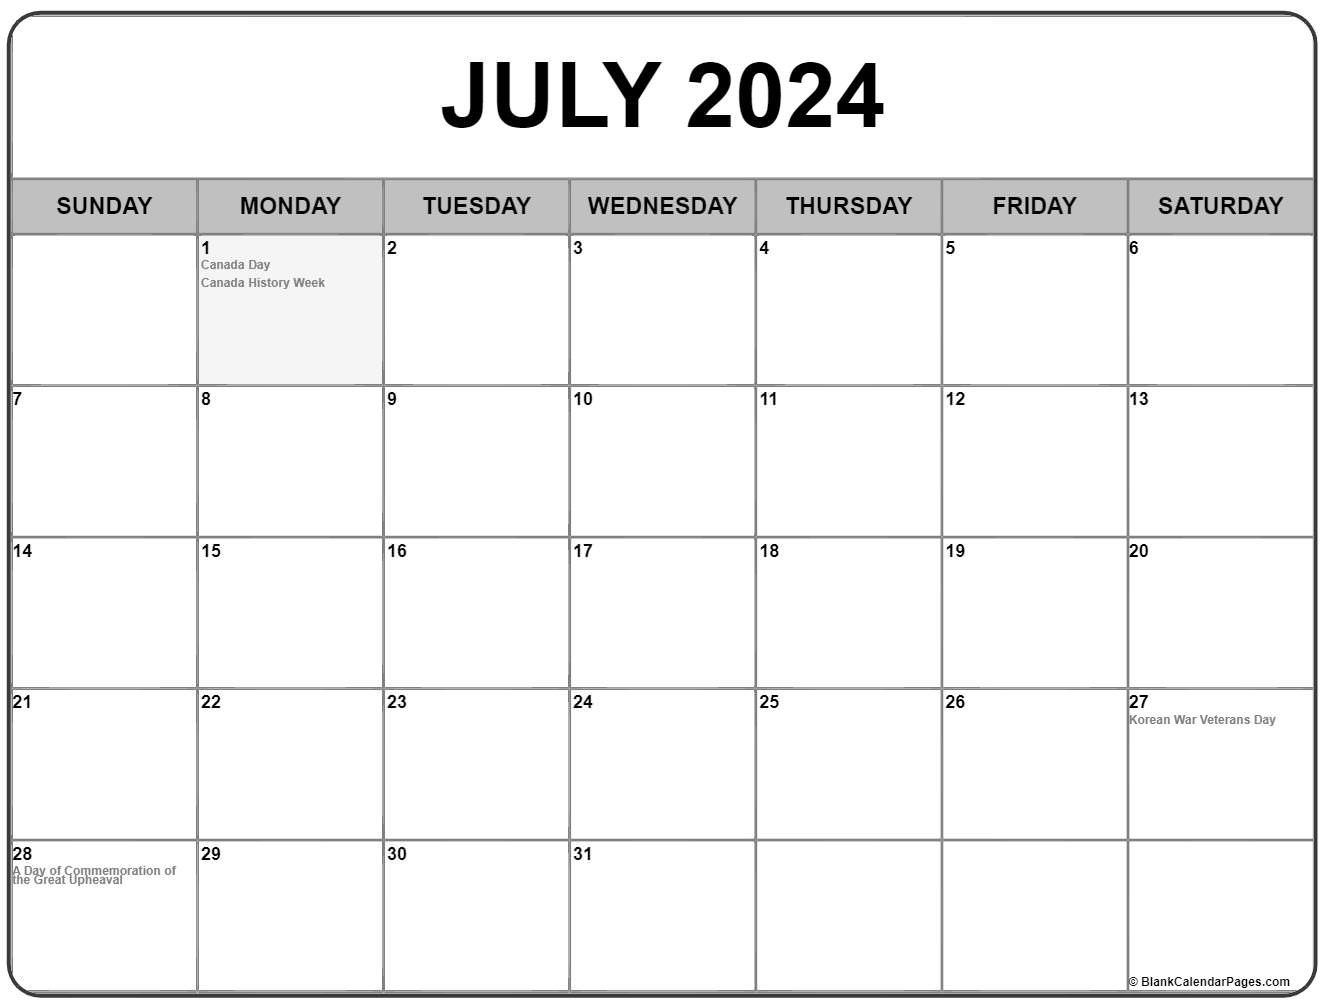 July 2023 With Holidays Calendar